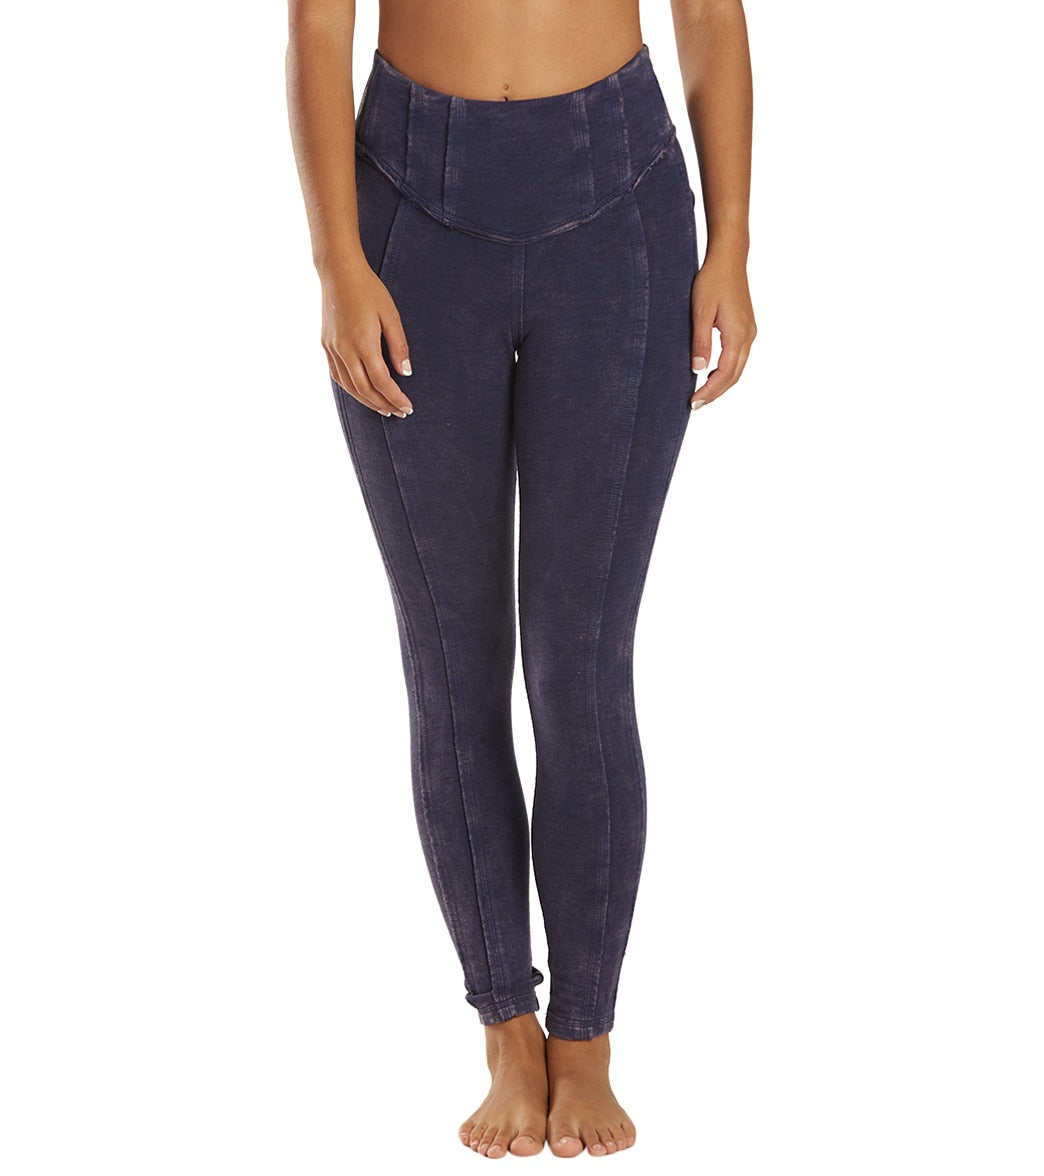 Free People Hybrid Yoga Leggings at YogaOutlet.com - Free Shipping